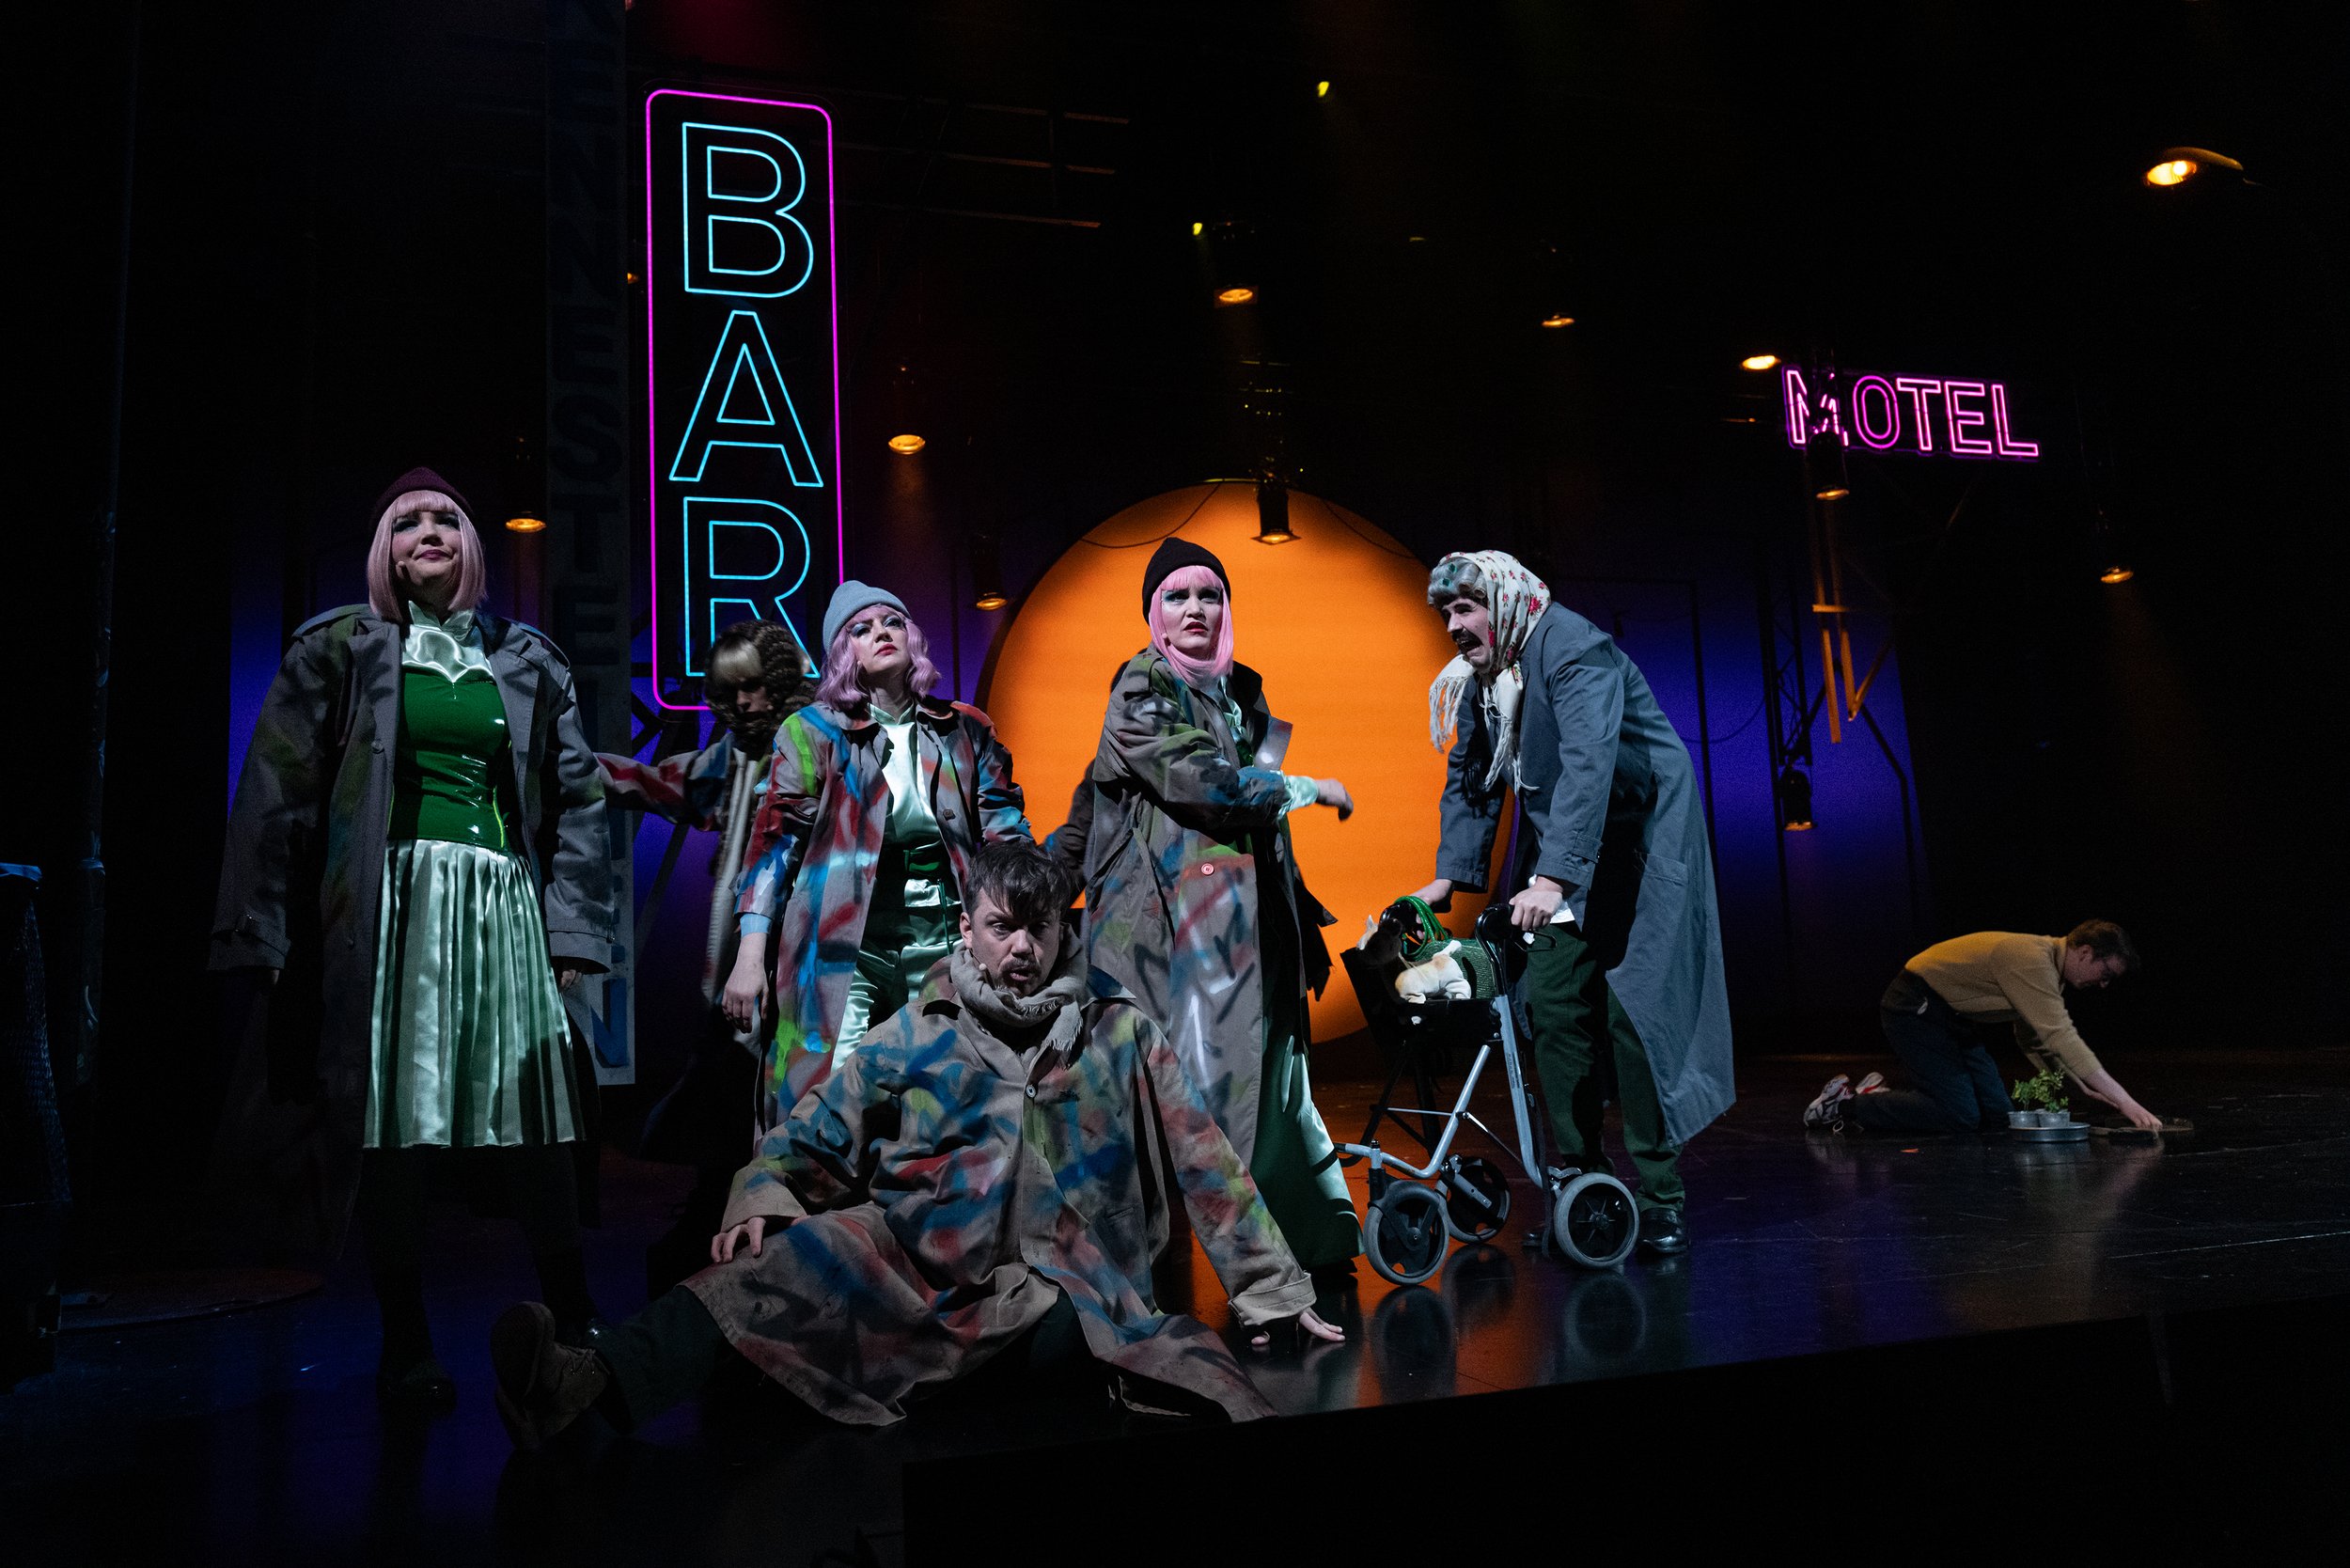   Little Shop of Horrors  by Howard Ashman and Alan Menken premiered at Hålogaland Teater in Tromsø, Norway in February 2024. The text was translated to Northern Norwegian by Mari Andreassen (dialogue) and Ragnar Olsen (lyrics).   Artistic Team: Mort